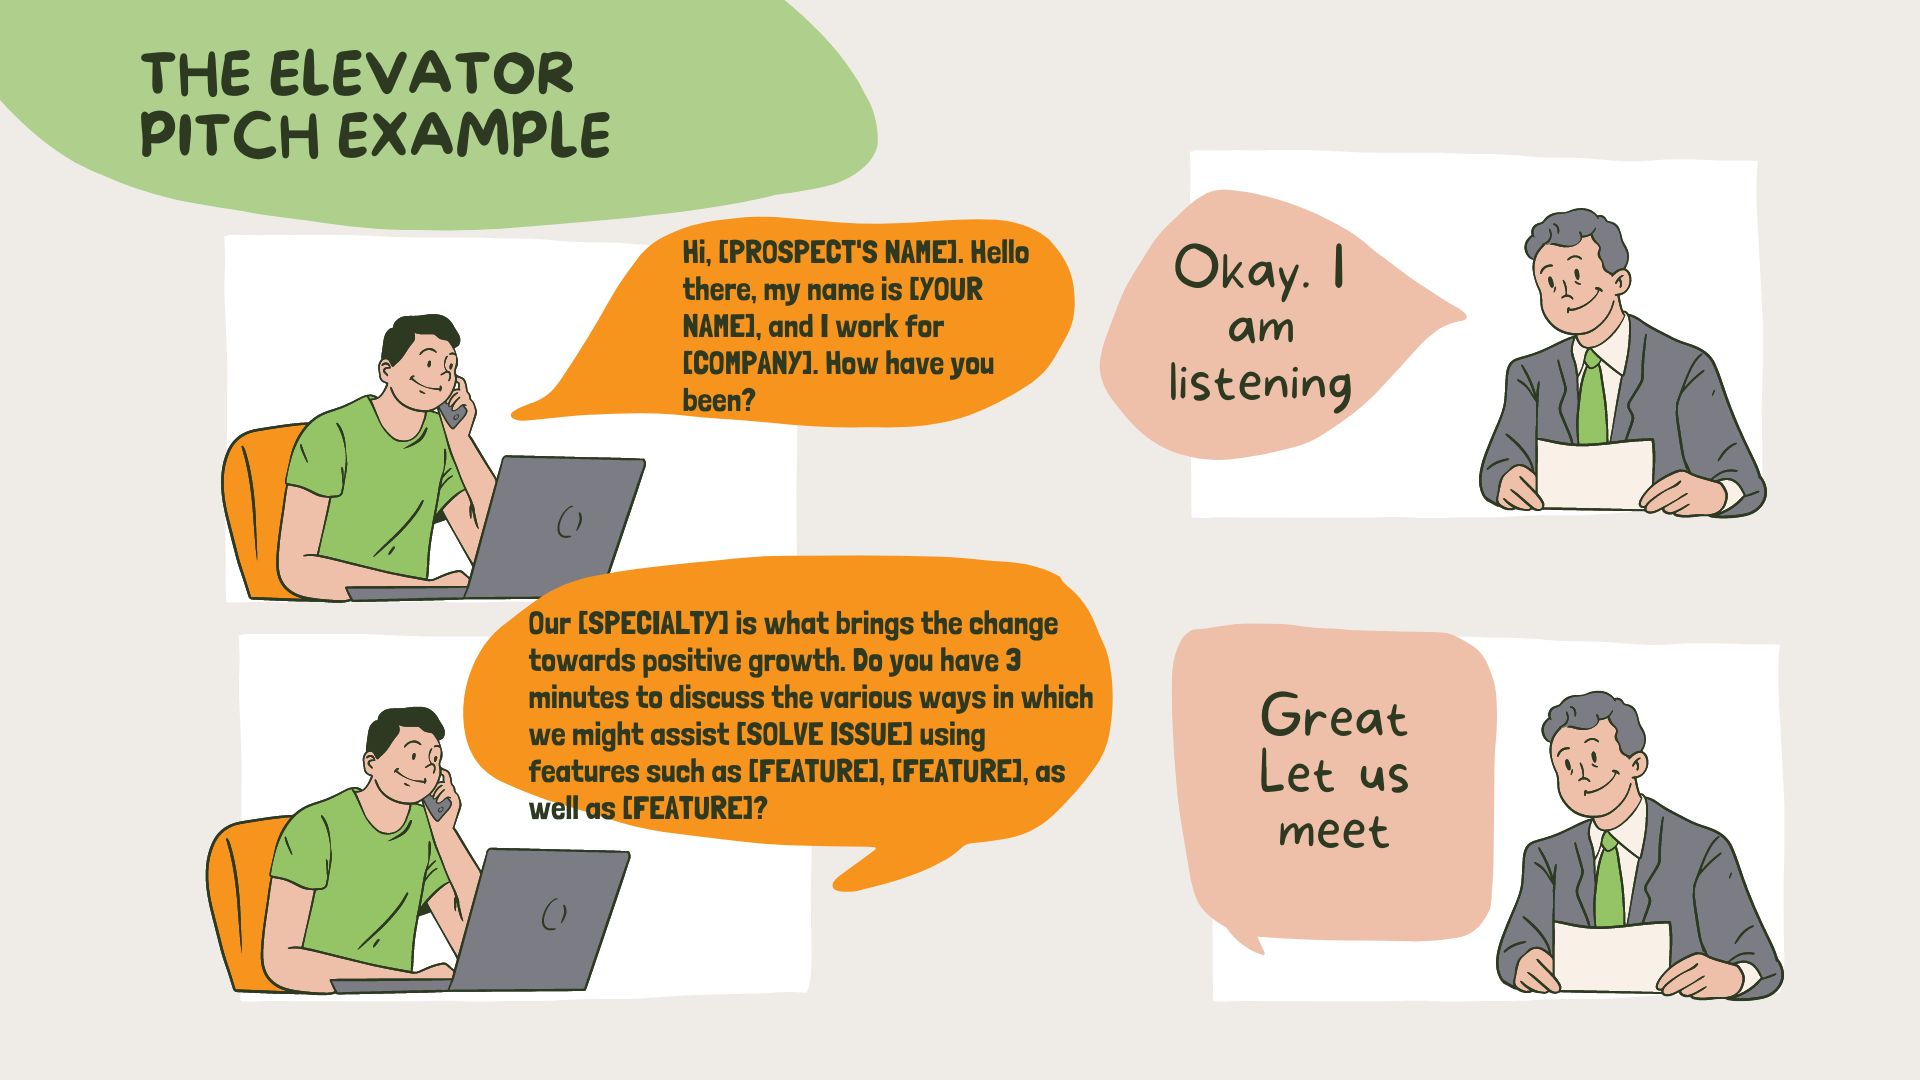 The elevator pitch example